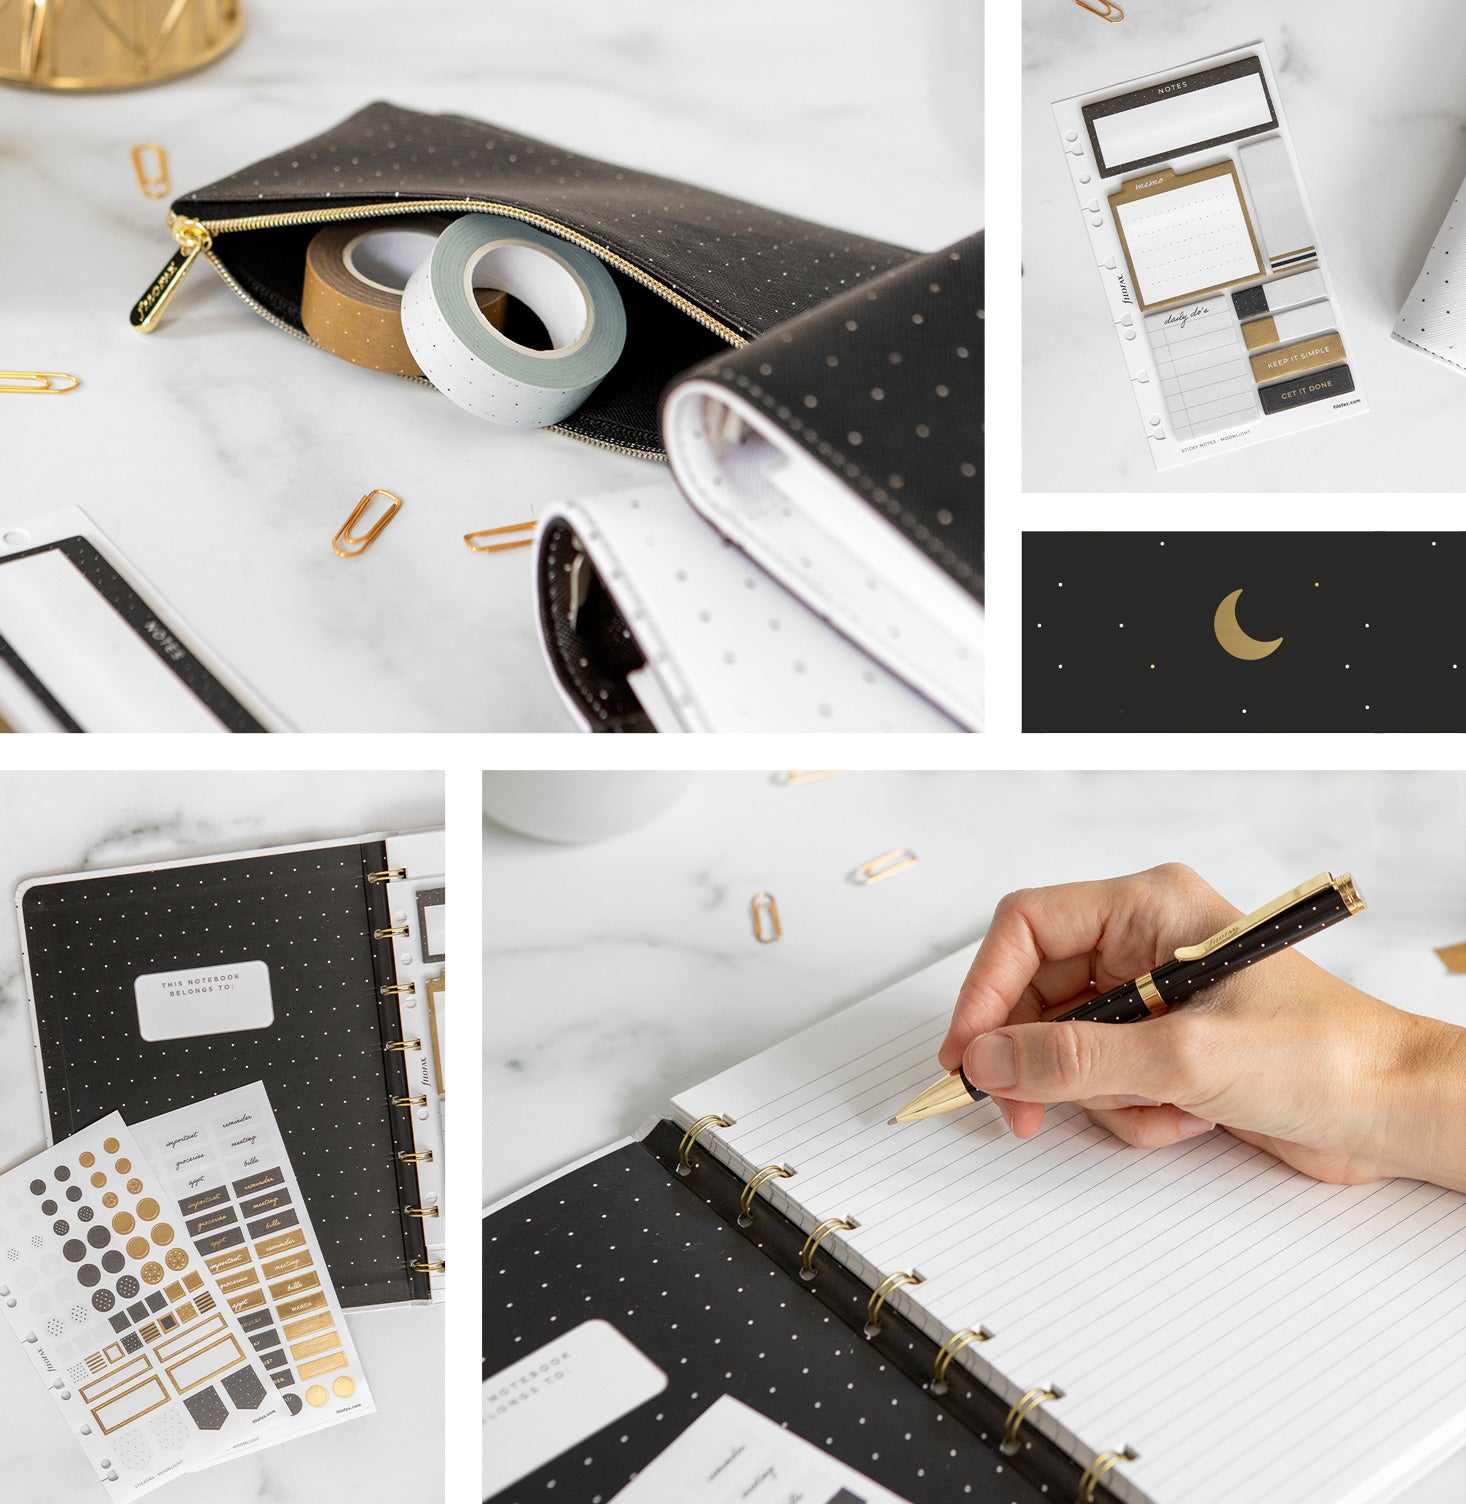 Moonlight Stationery Accessories by Filofax